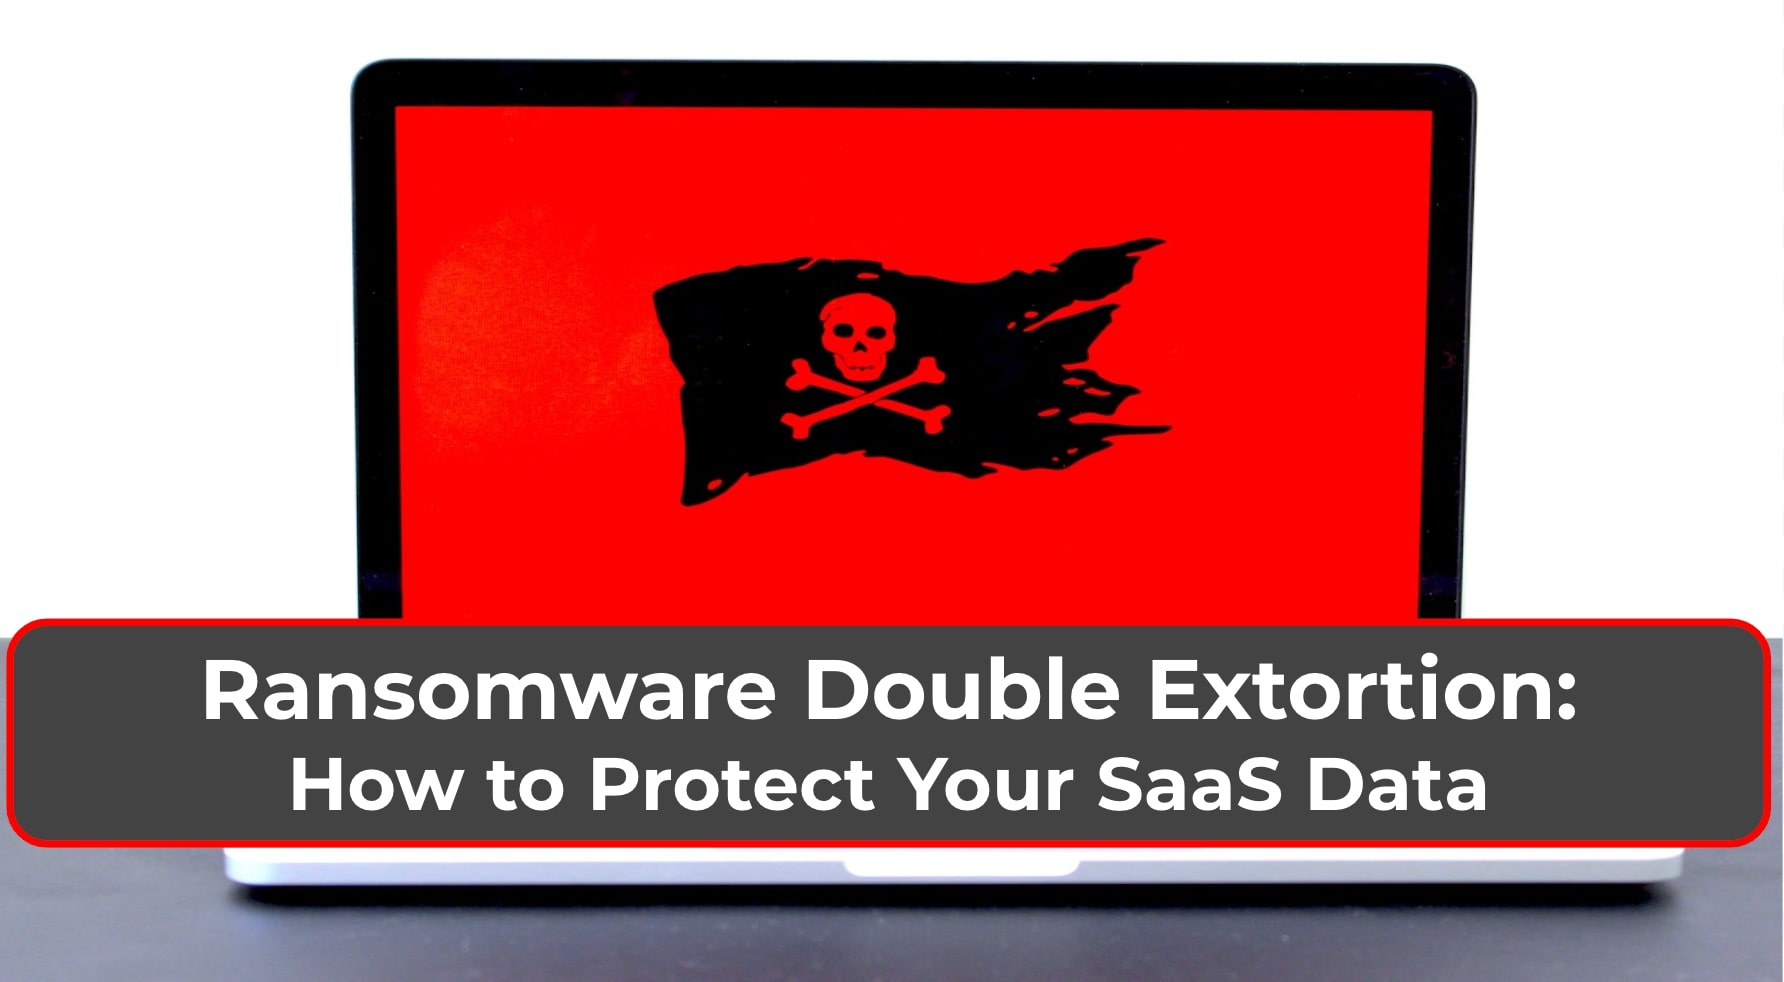 Ransomware Double Extortion: How to Protect Your SaaS Data